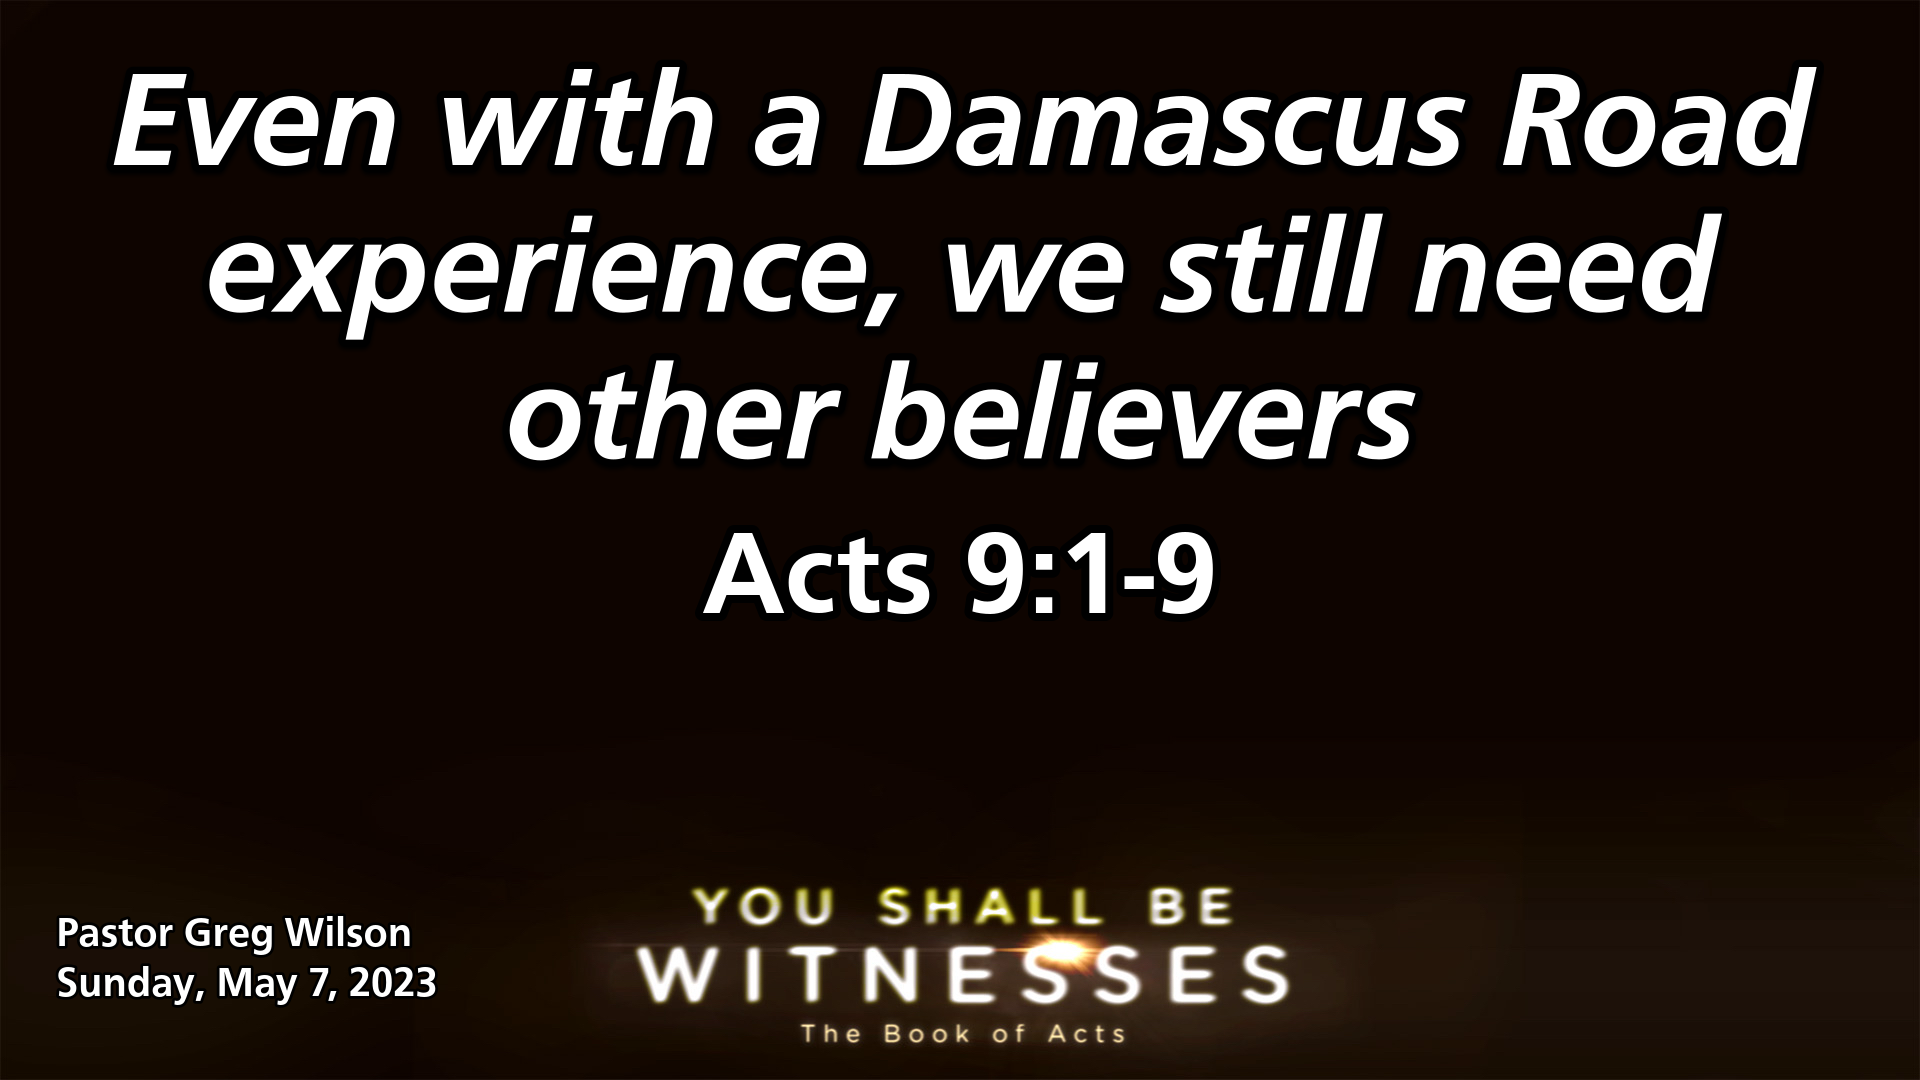 "Even with a Damascus Road experience, we still need other believers"